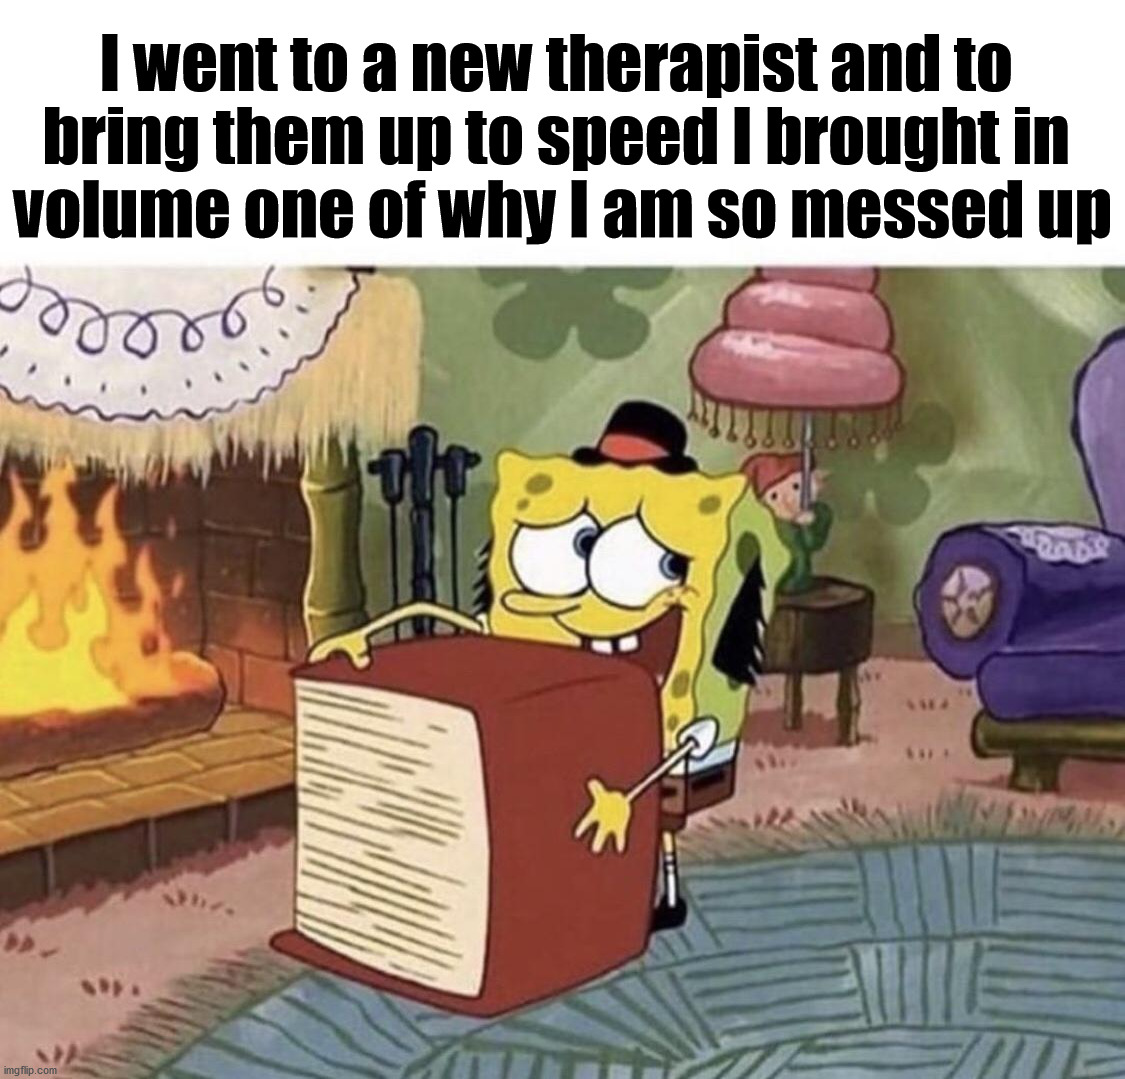 Seek help if you are having problems. | I went to a new therapist and to 
bring them up to speed I brought in 
volume one of why I am so messed up | image tagged in therapist,help | made w/ Imgflip meme maker